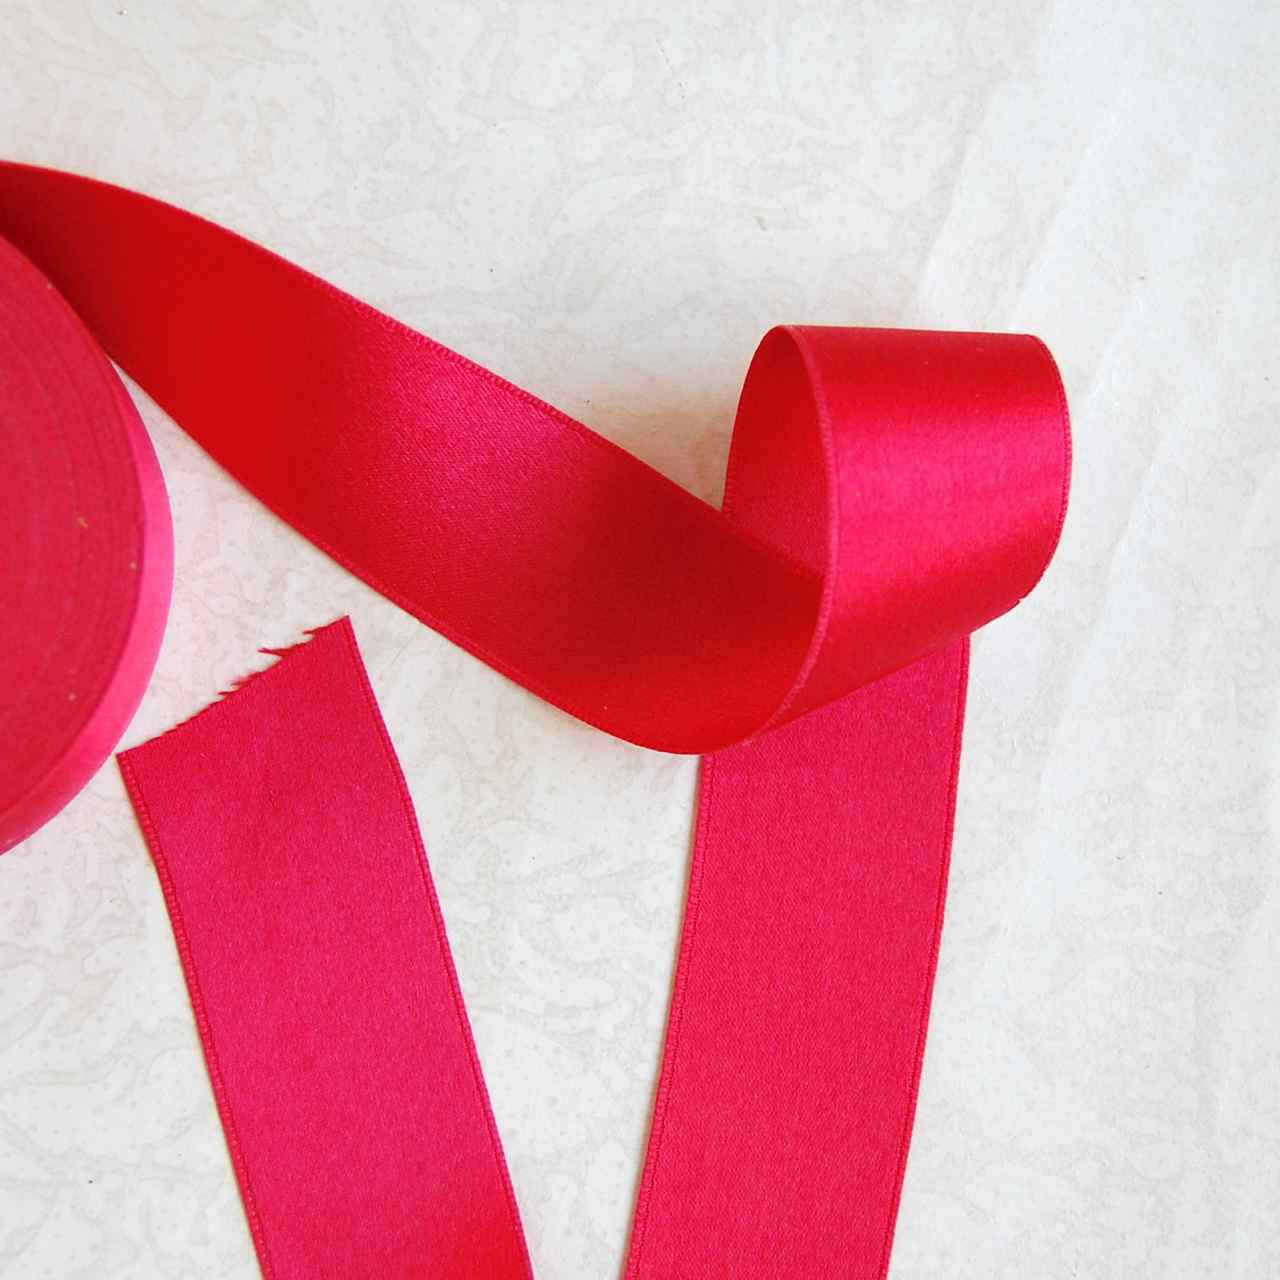  Solid Color Double Faced Red Satin Ribbon 1-1/2 X 50